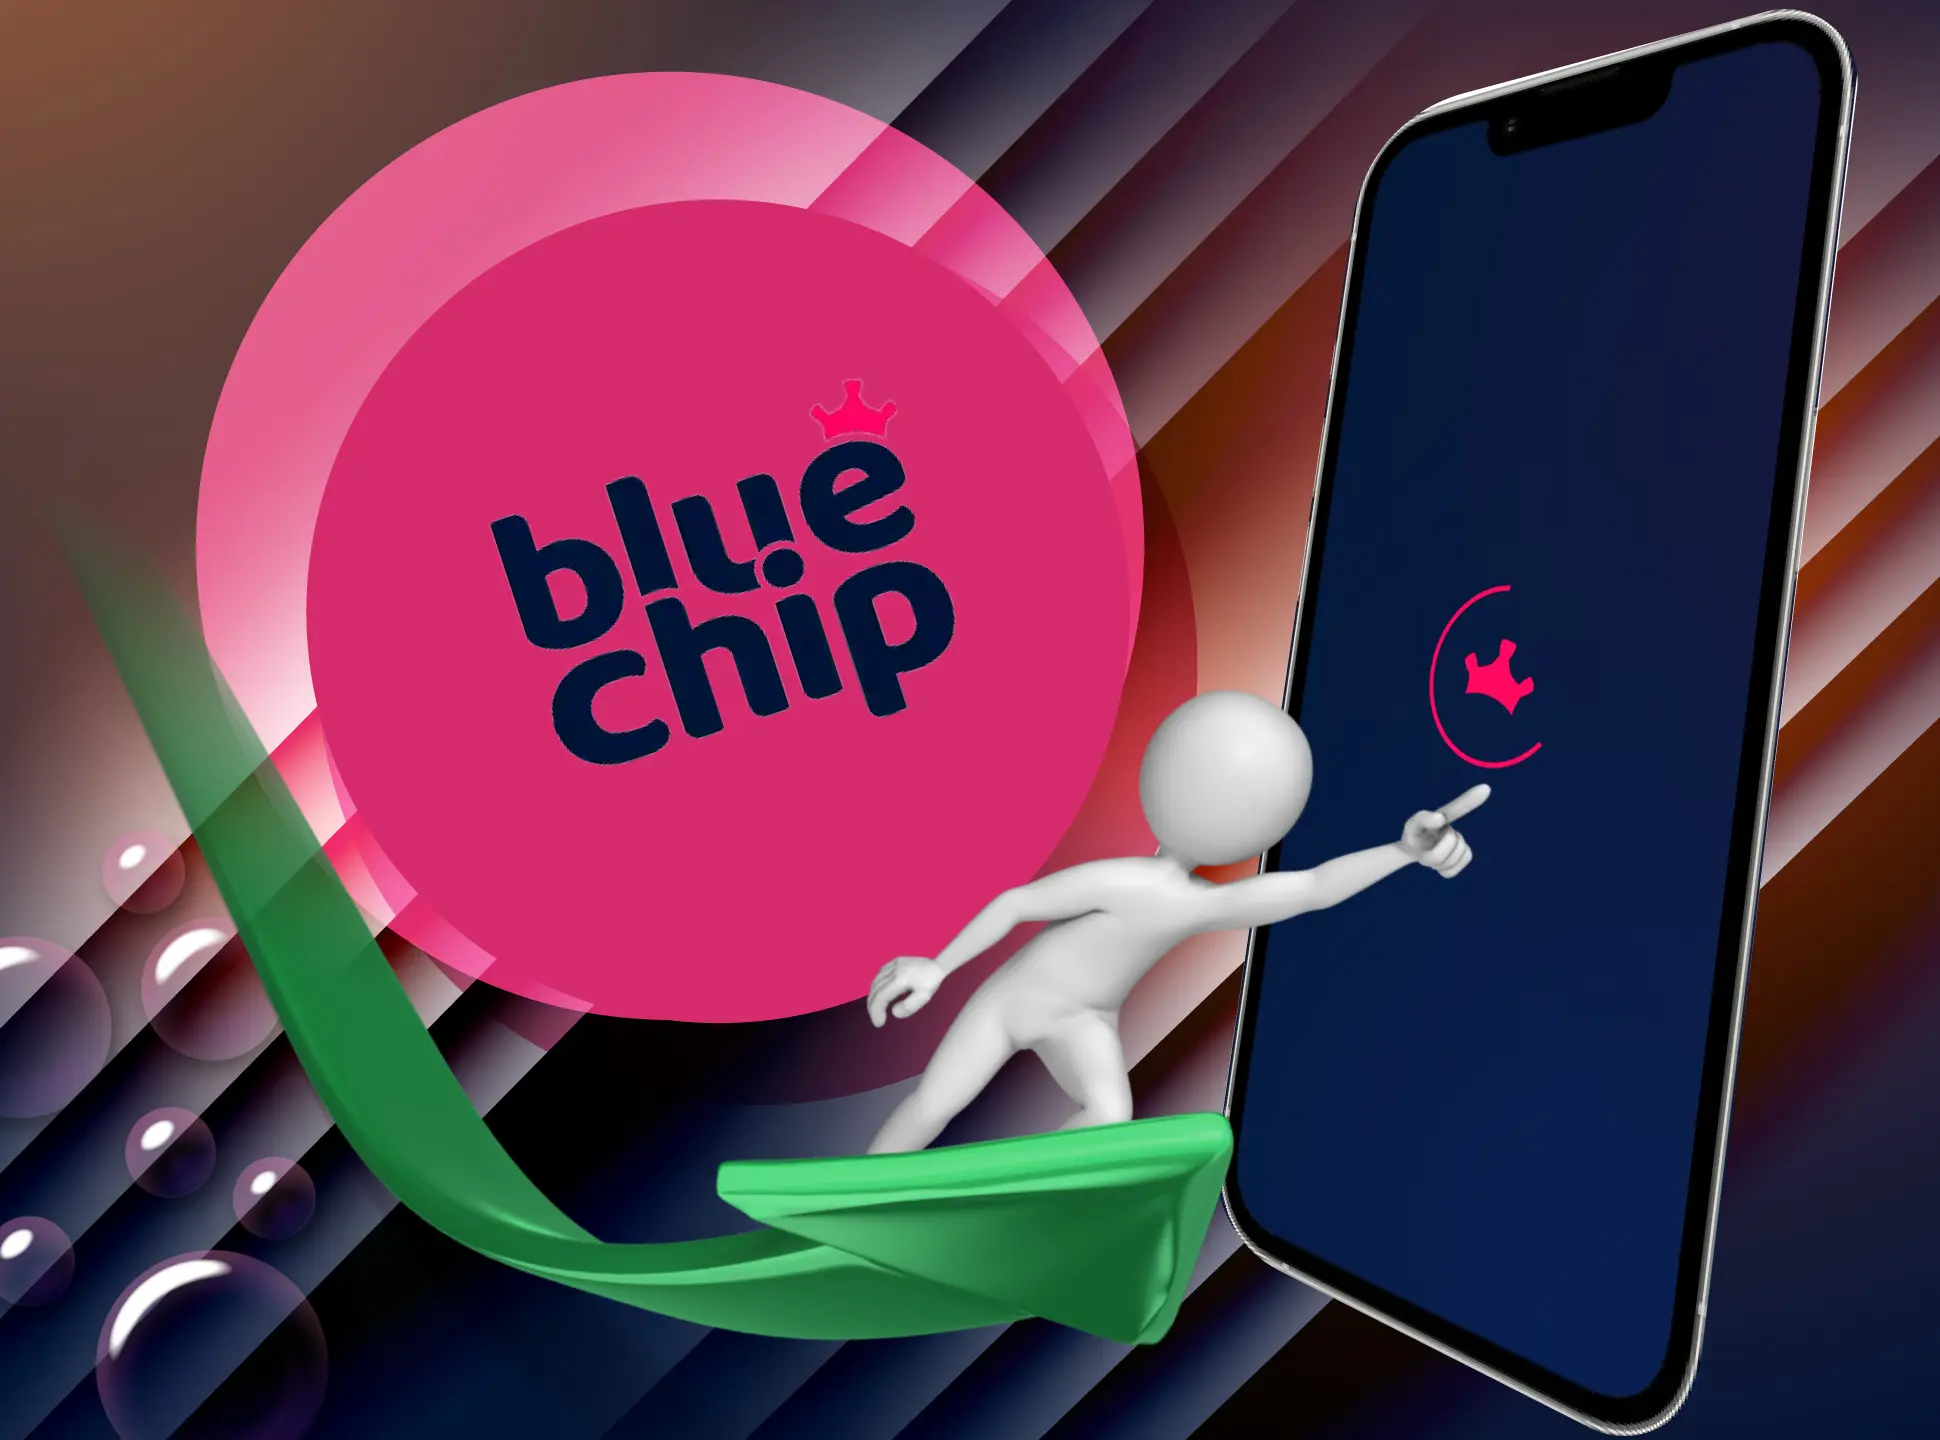 The Bluechip app is updated automatically and doesn't need your approach.